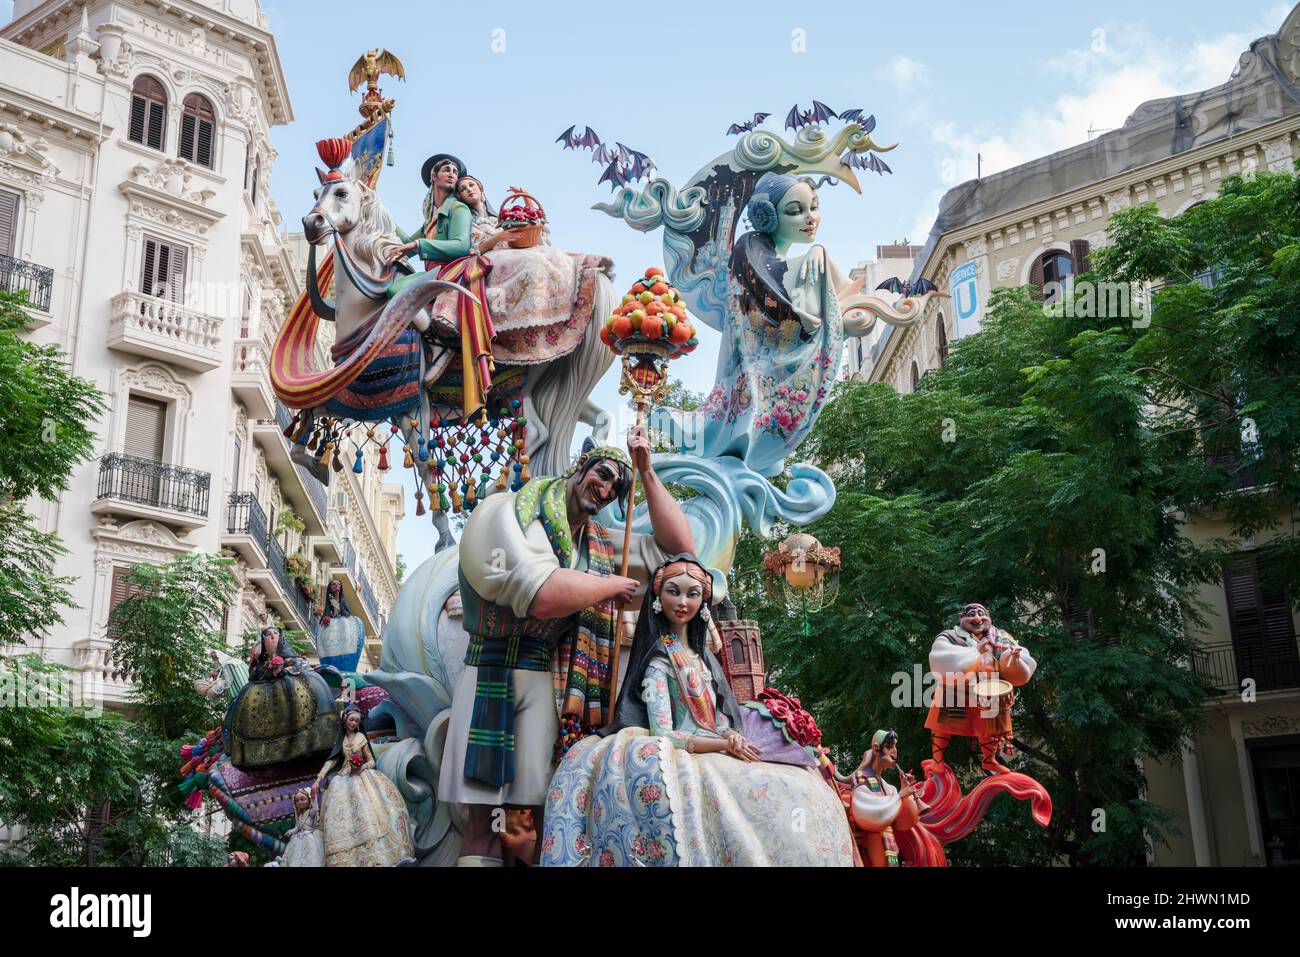 Valencia, Spain - 4 September 2021: Large paper mache sculpture displaying traditional celebration elements of the festival Fallas Stock Photo